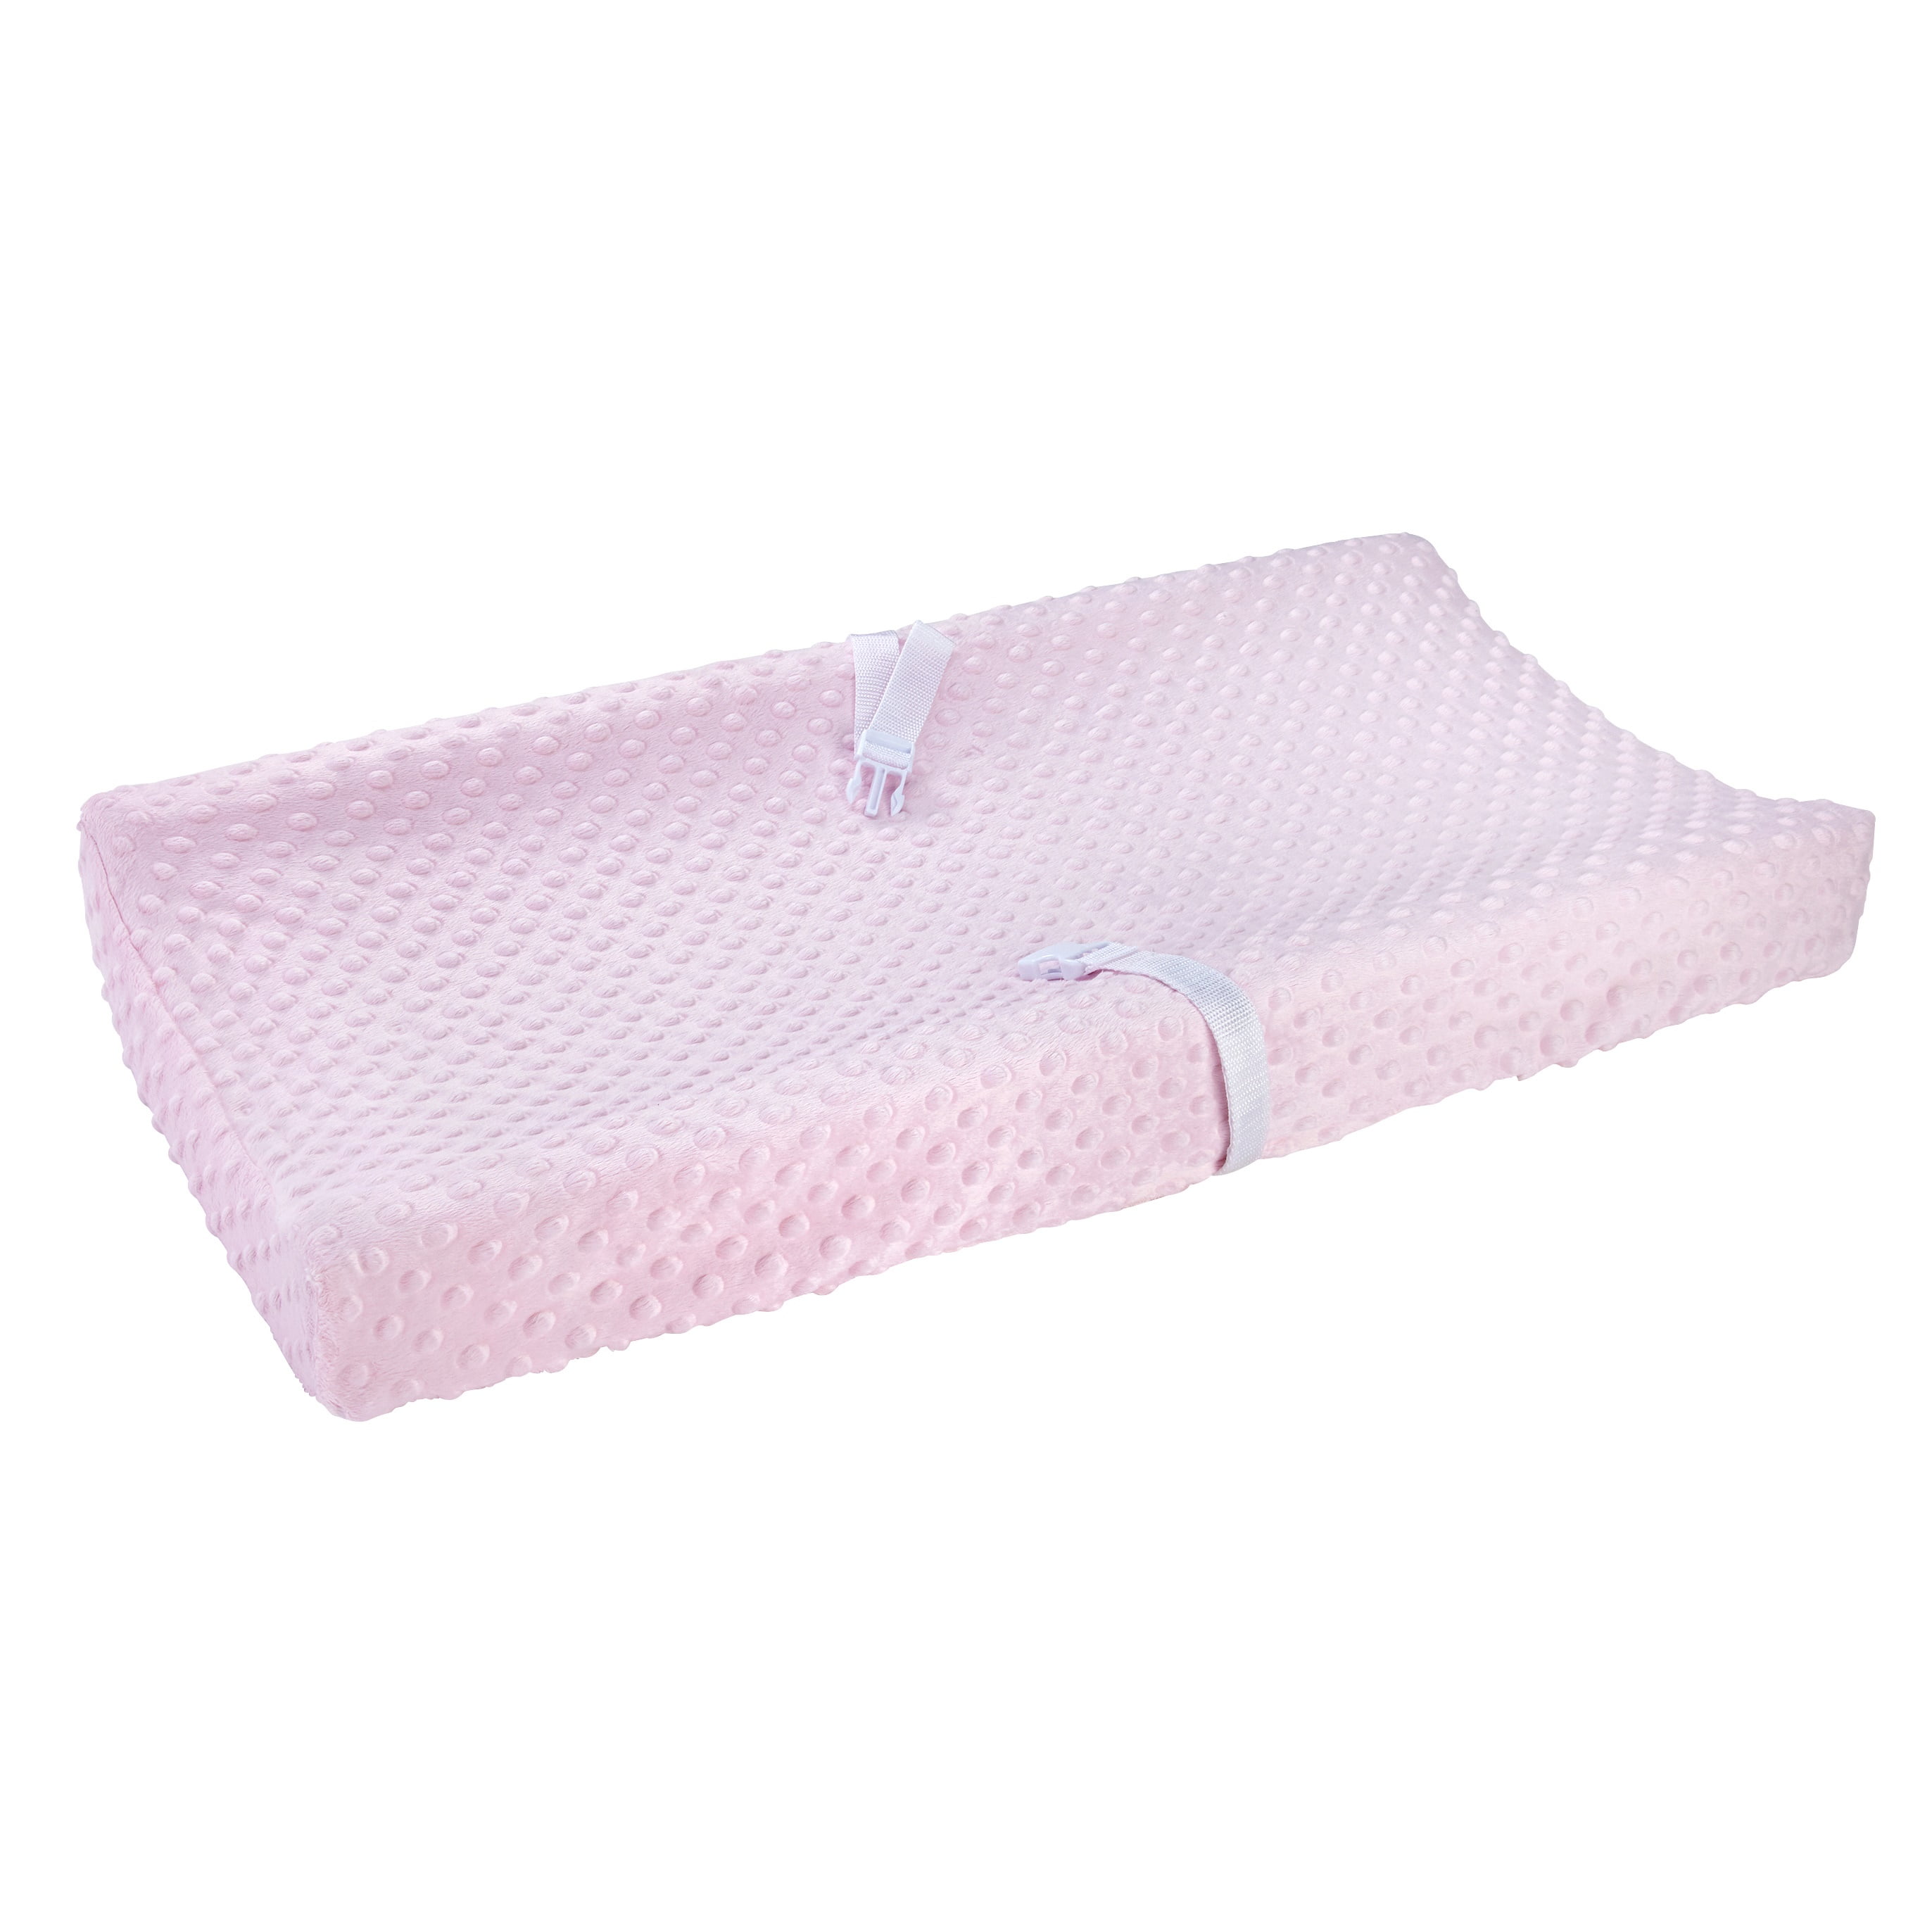 Your choice of Blue or Pink! Munchkin Changing Pad Cover 